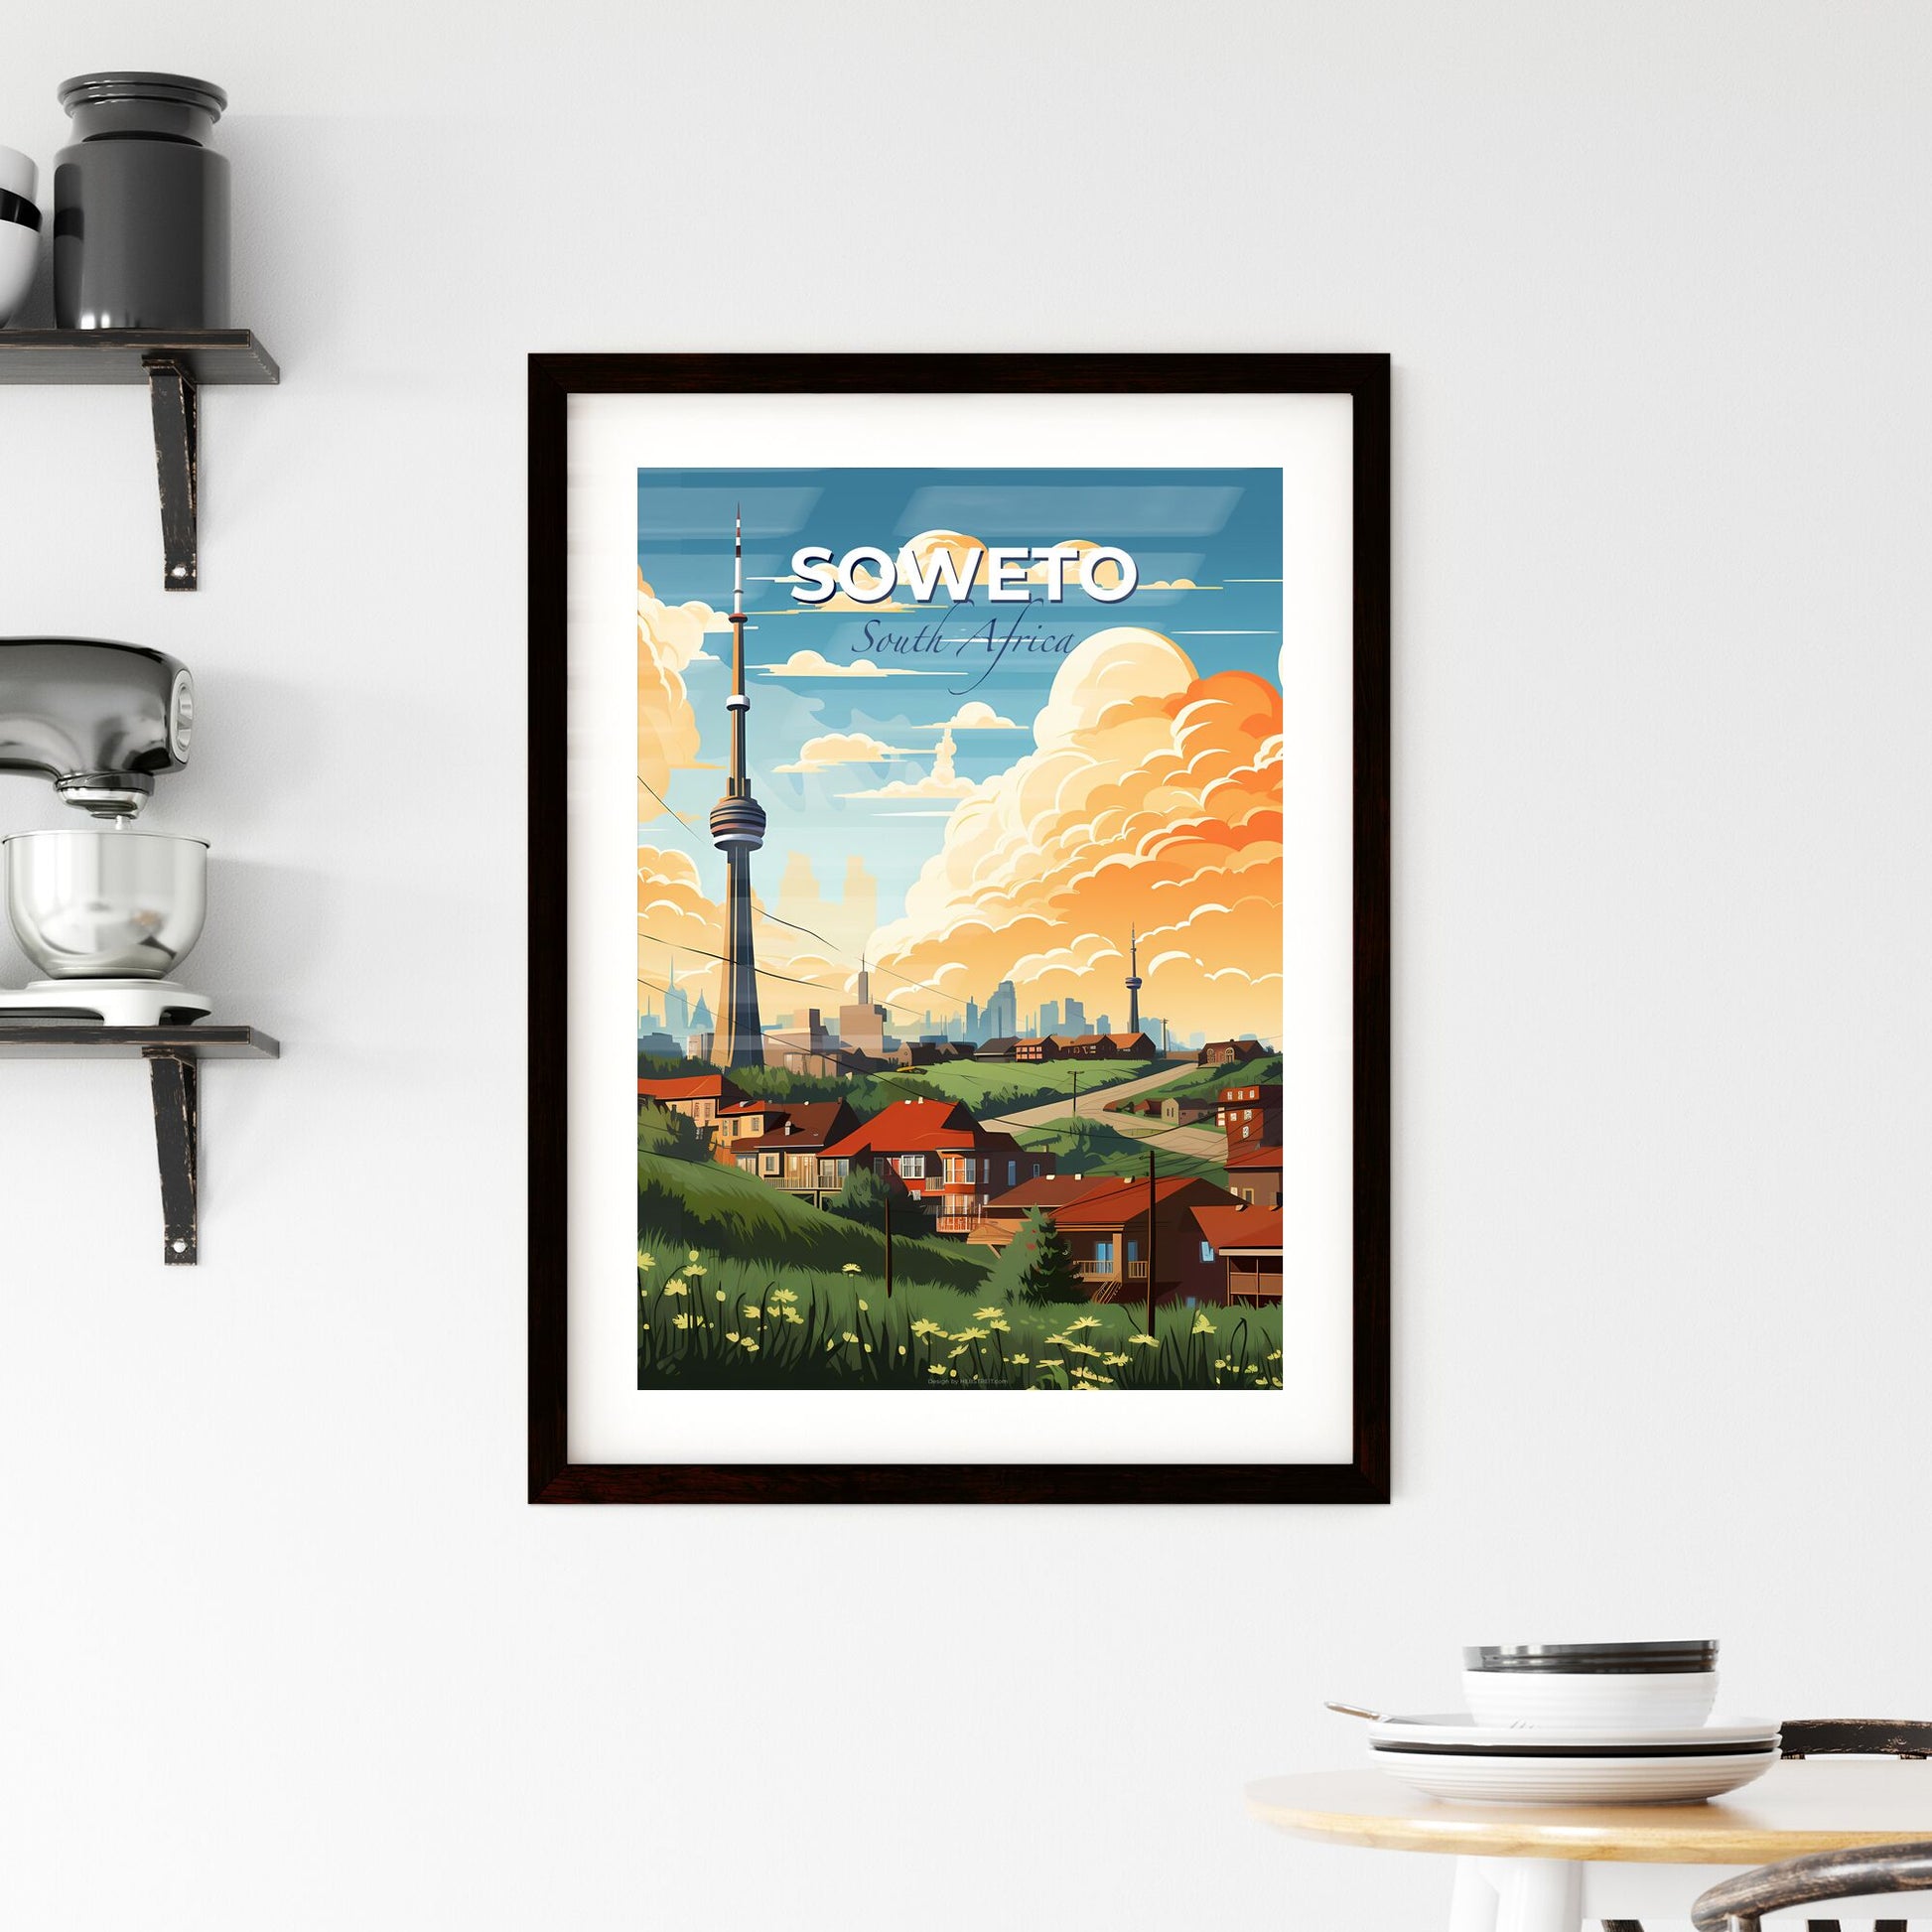 Impressionistic Soweto South Africa Cityscape with Tower and Vivid Painted Style City Skyline Default Title